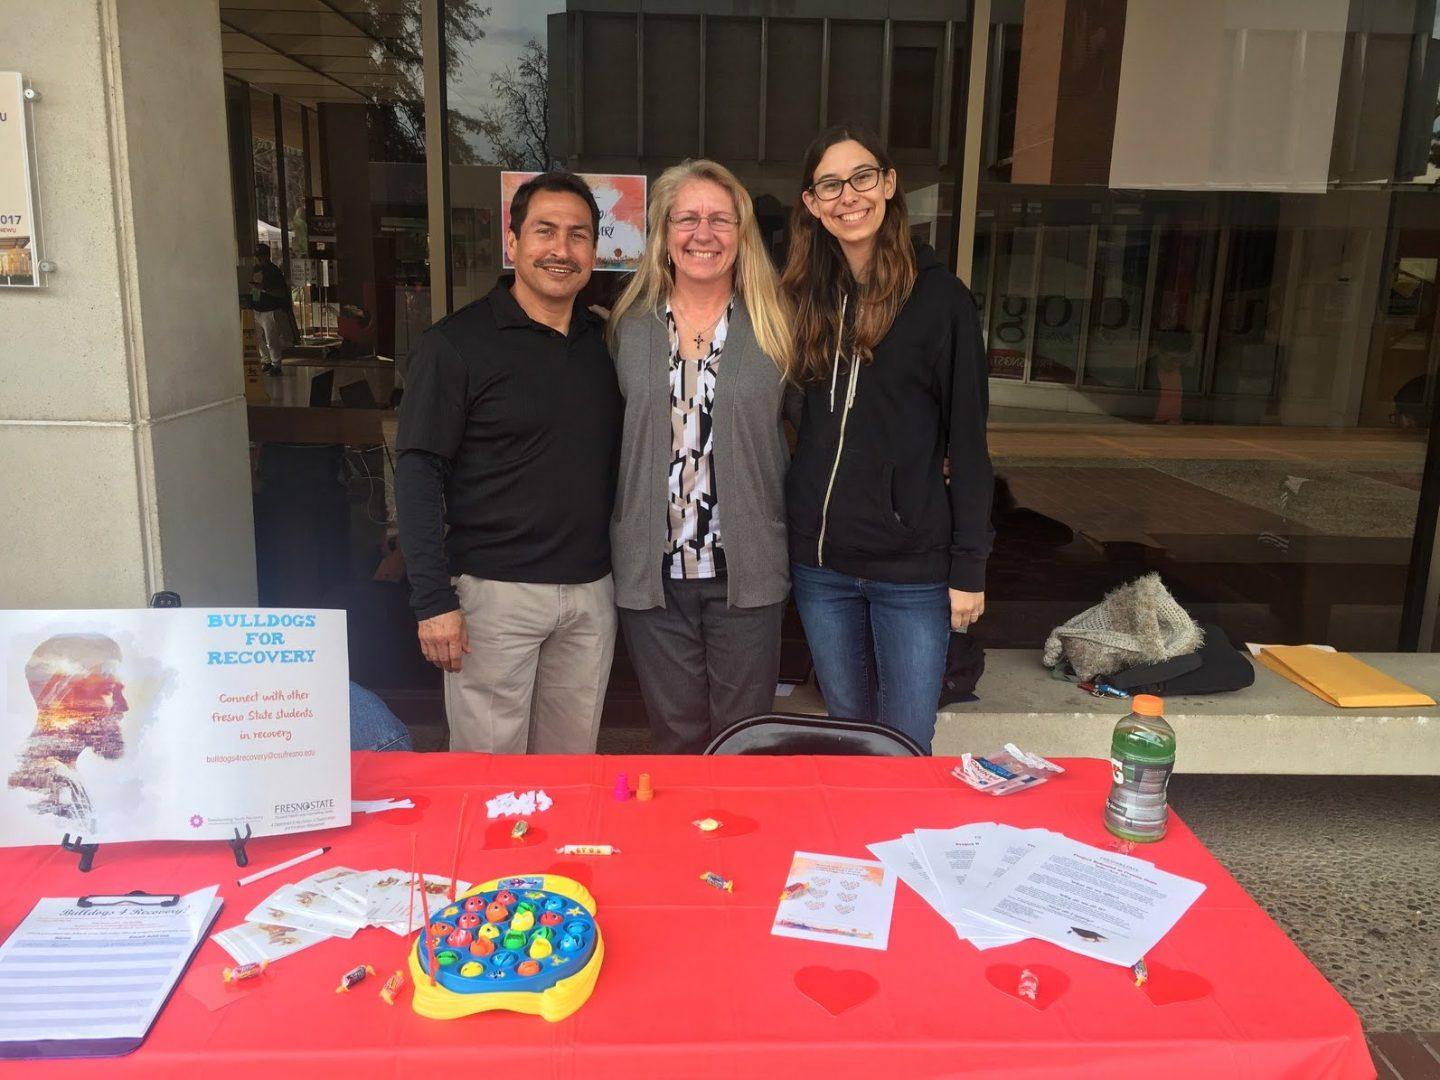 Arnold Trevino (left), Jennifer Leahy (center) and Hannah Riccardi (right) tabling for Project Rebound in partnership with the Student Health Center at the University Student Union in spring 2017. (Courtesy of Project Rebound)